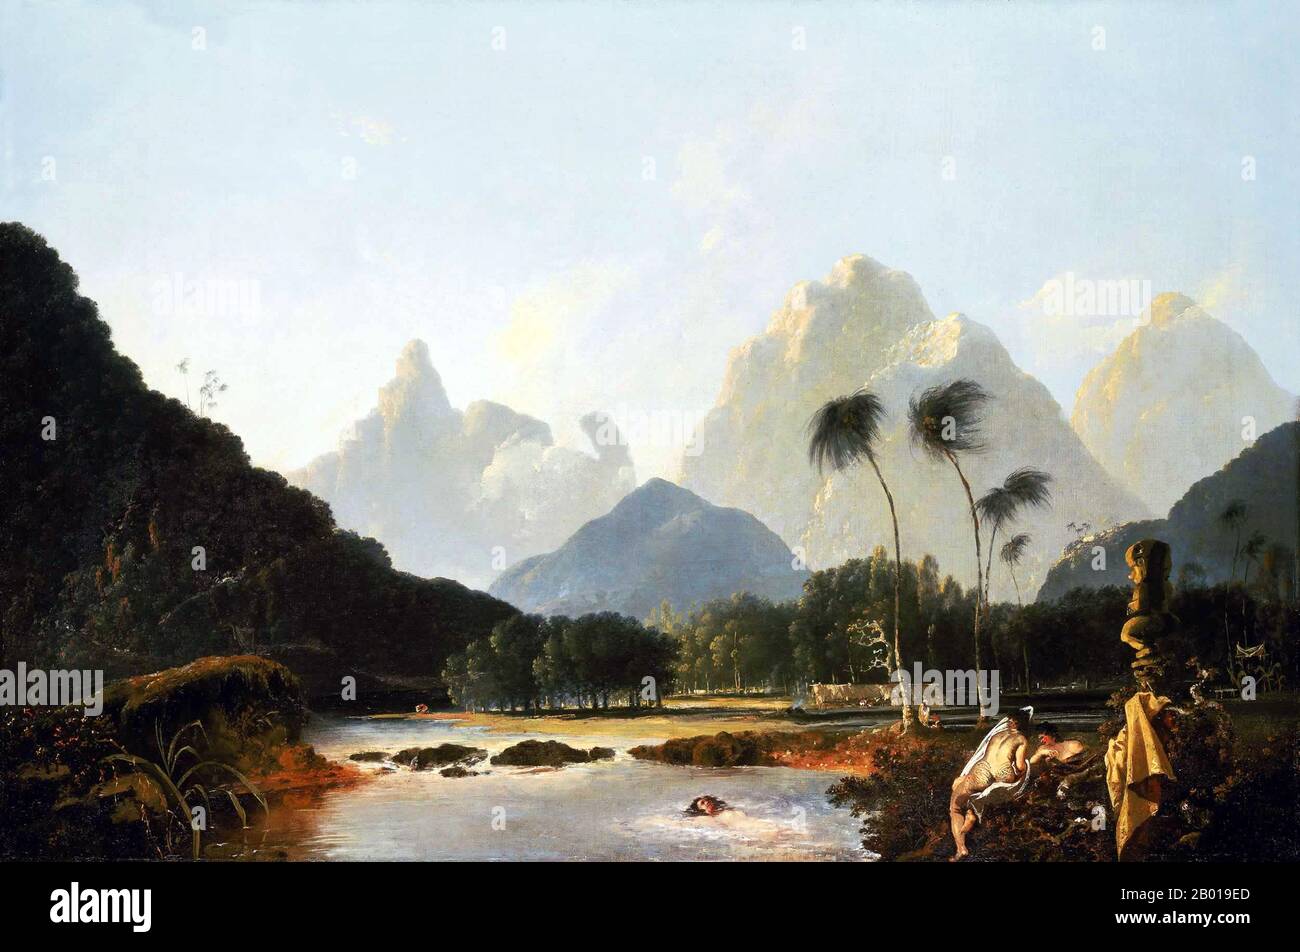 Tahiti: 'A View Taken in the Bay of Oaite Peha, Otaheite (Tahiti Revisited)'. Oil on canvas painting by William Hodges (28 October 1744 - 6 March 1797), c. 1776.  William Hodges was an English painter. He was a member of James Cook's second voyage to the Pacific Ocean, and is best known for the sketches and paintings of locations he visited on that voyage, including Table Bay, Tahiti, Easter Island, and the Antarctic. Hodges accompanied Cook to the Pacific as the expedition's artist in 1772-1775. Many of his sketches and wash paintings were adapted as engravings in Cook's published journals. Stock Photo